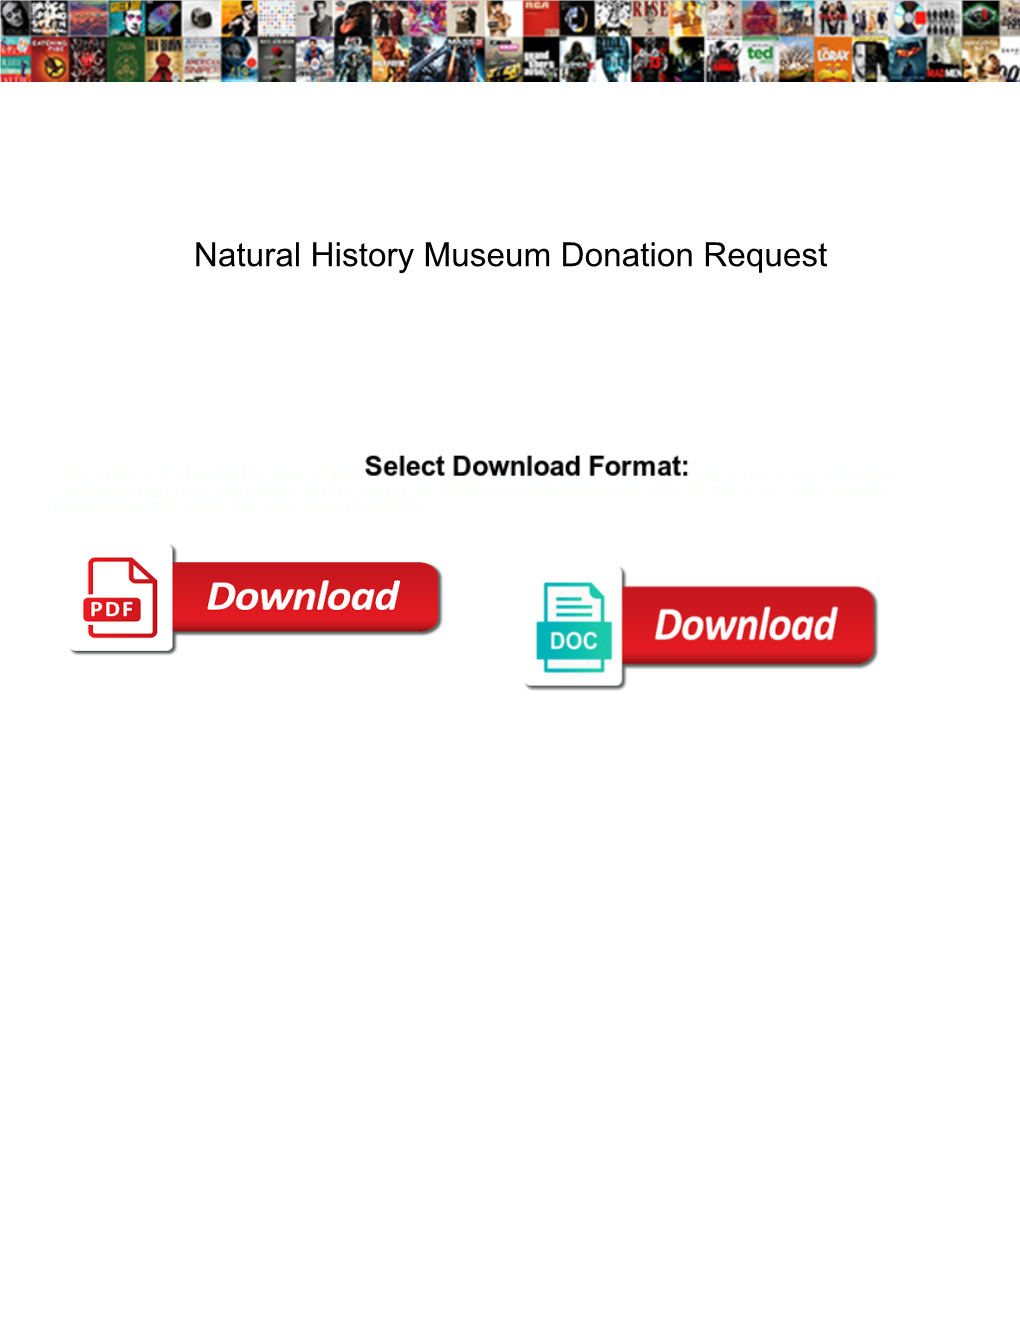 Natural History Museum Donation Request